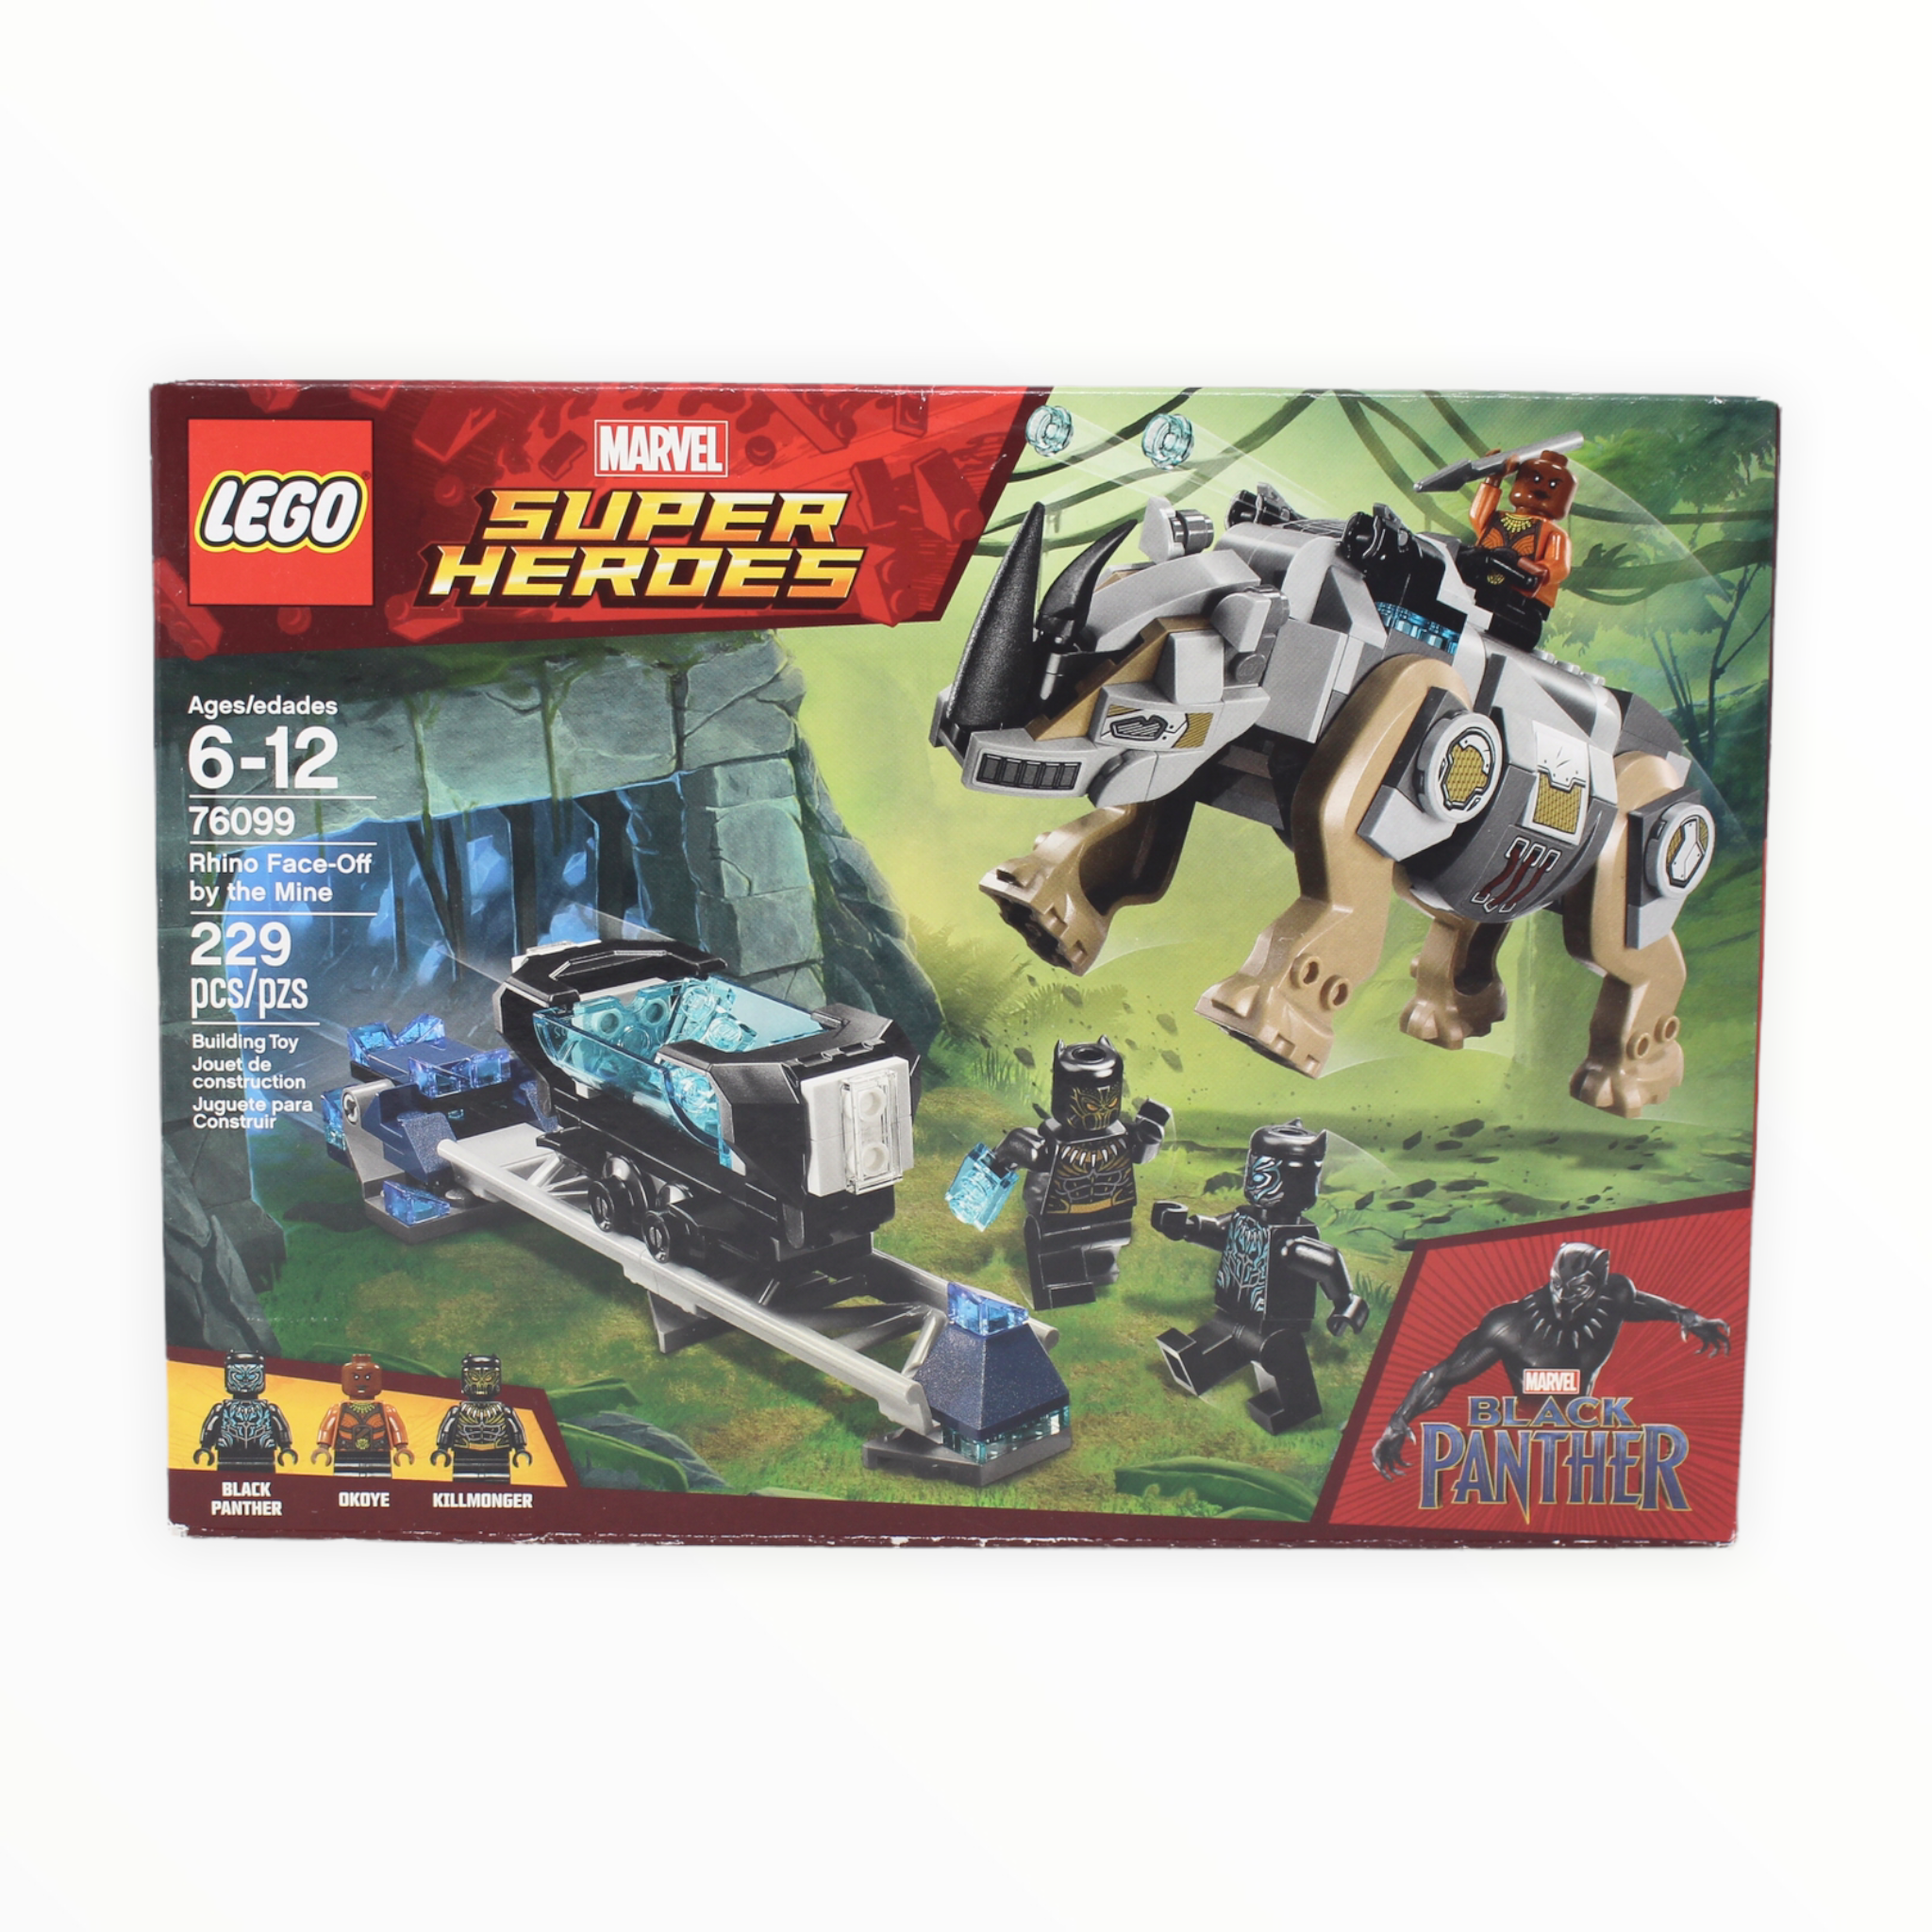 Retired Set 76099 Marvel Super Heroes Rhino Face-Off by the Mine